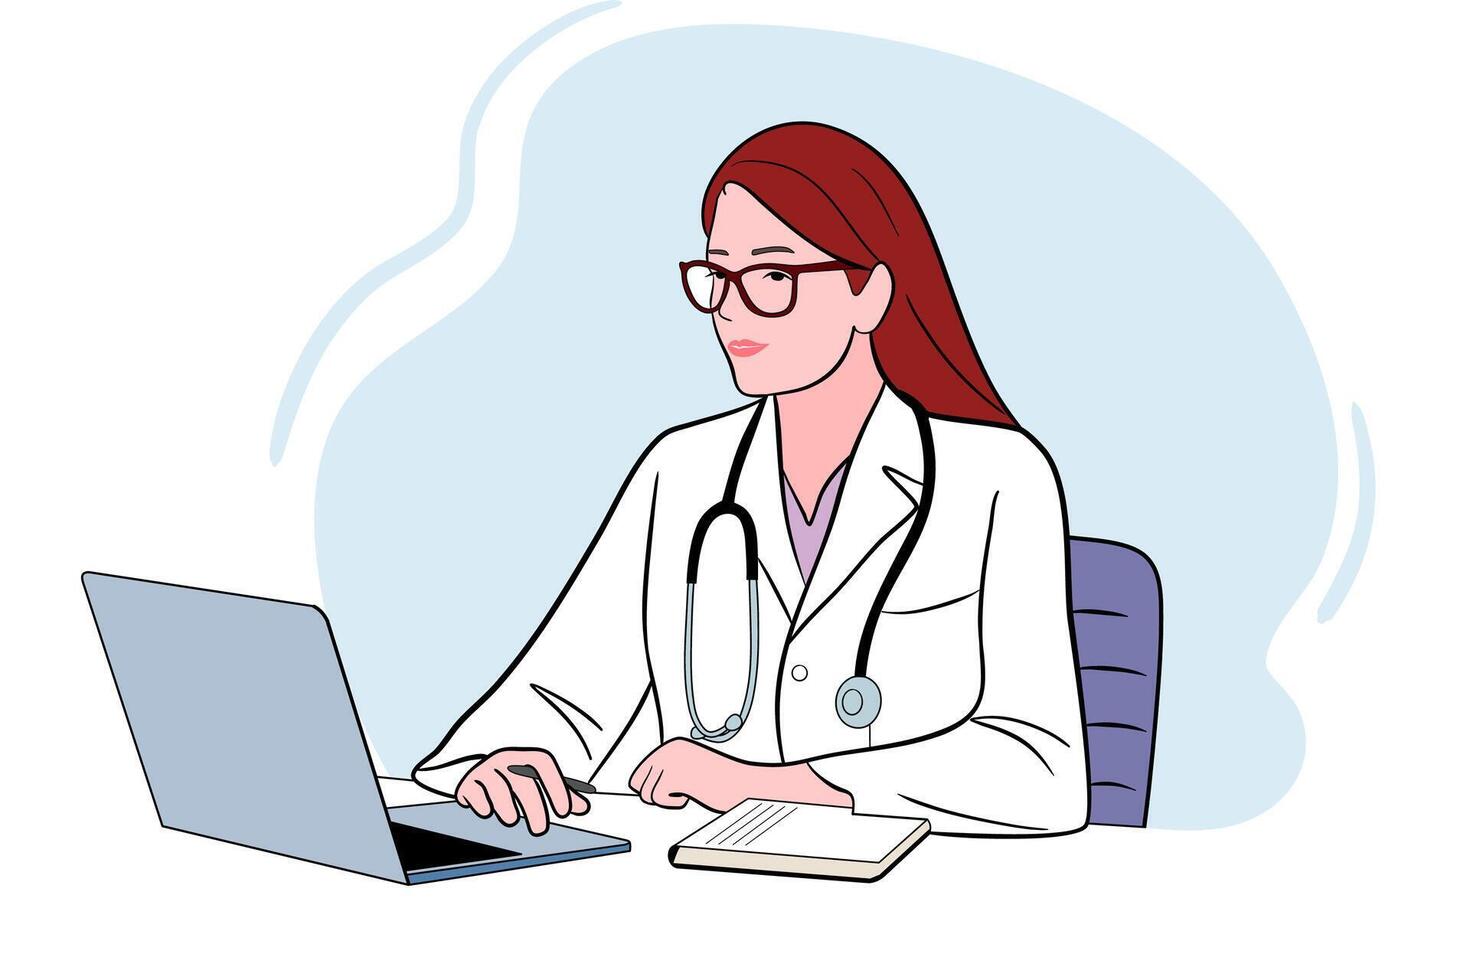 Female doctor character utilizing laptop for efficient medical practice, integrating technology into her work. vector